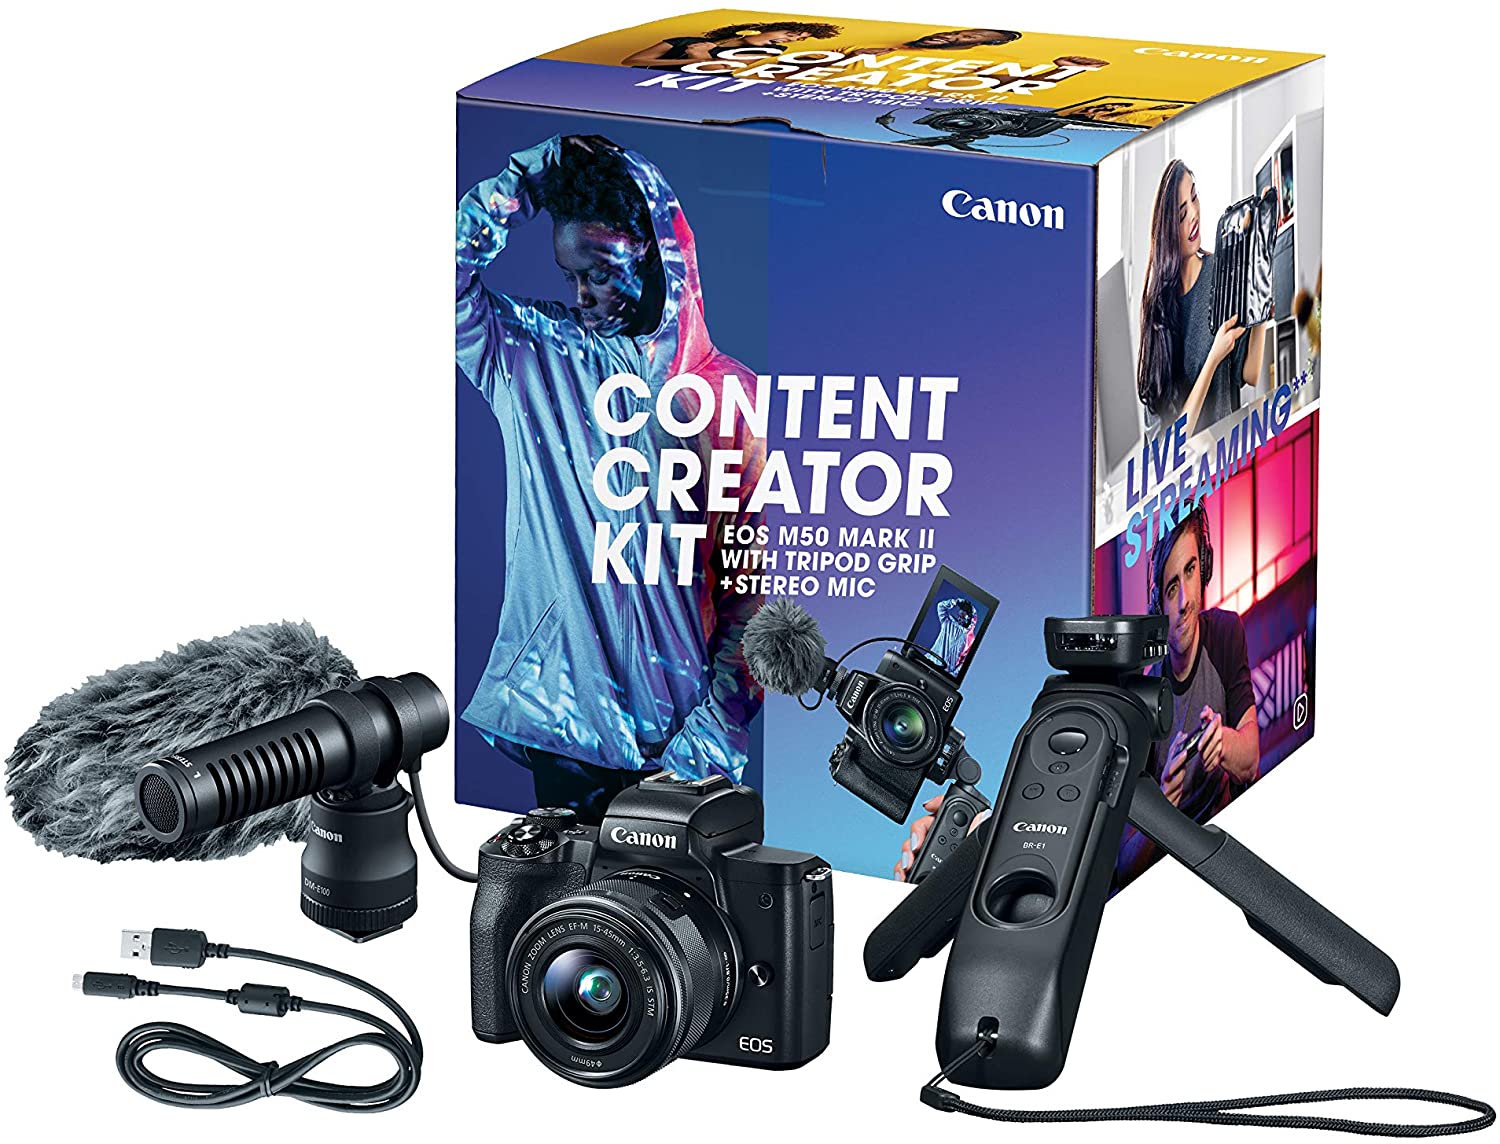 Canon EOS M50 Mark II Content Creator Kit, Mirrorless 4K Vlogging Camera Kit Includes EF-M 15-45mm Lens, Tripod Grip, Stereo Microphone - $735